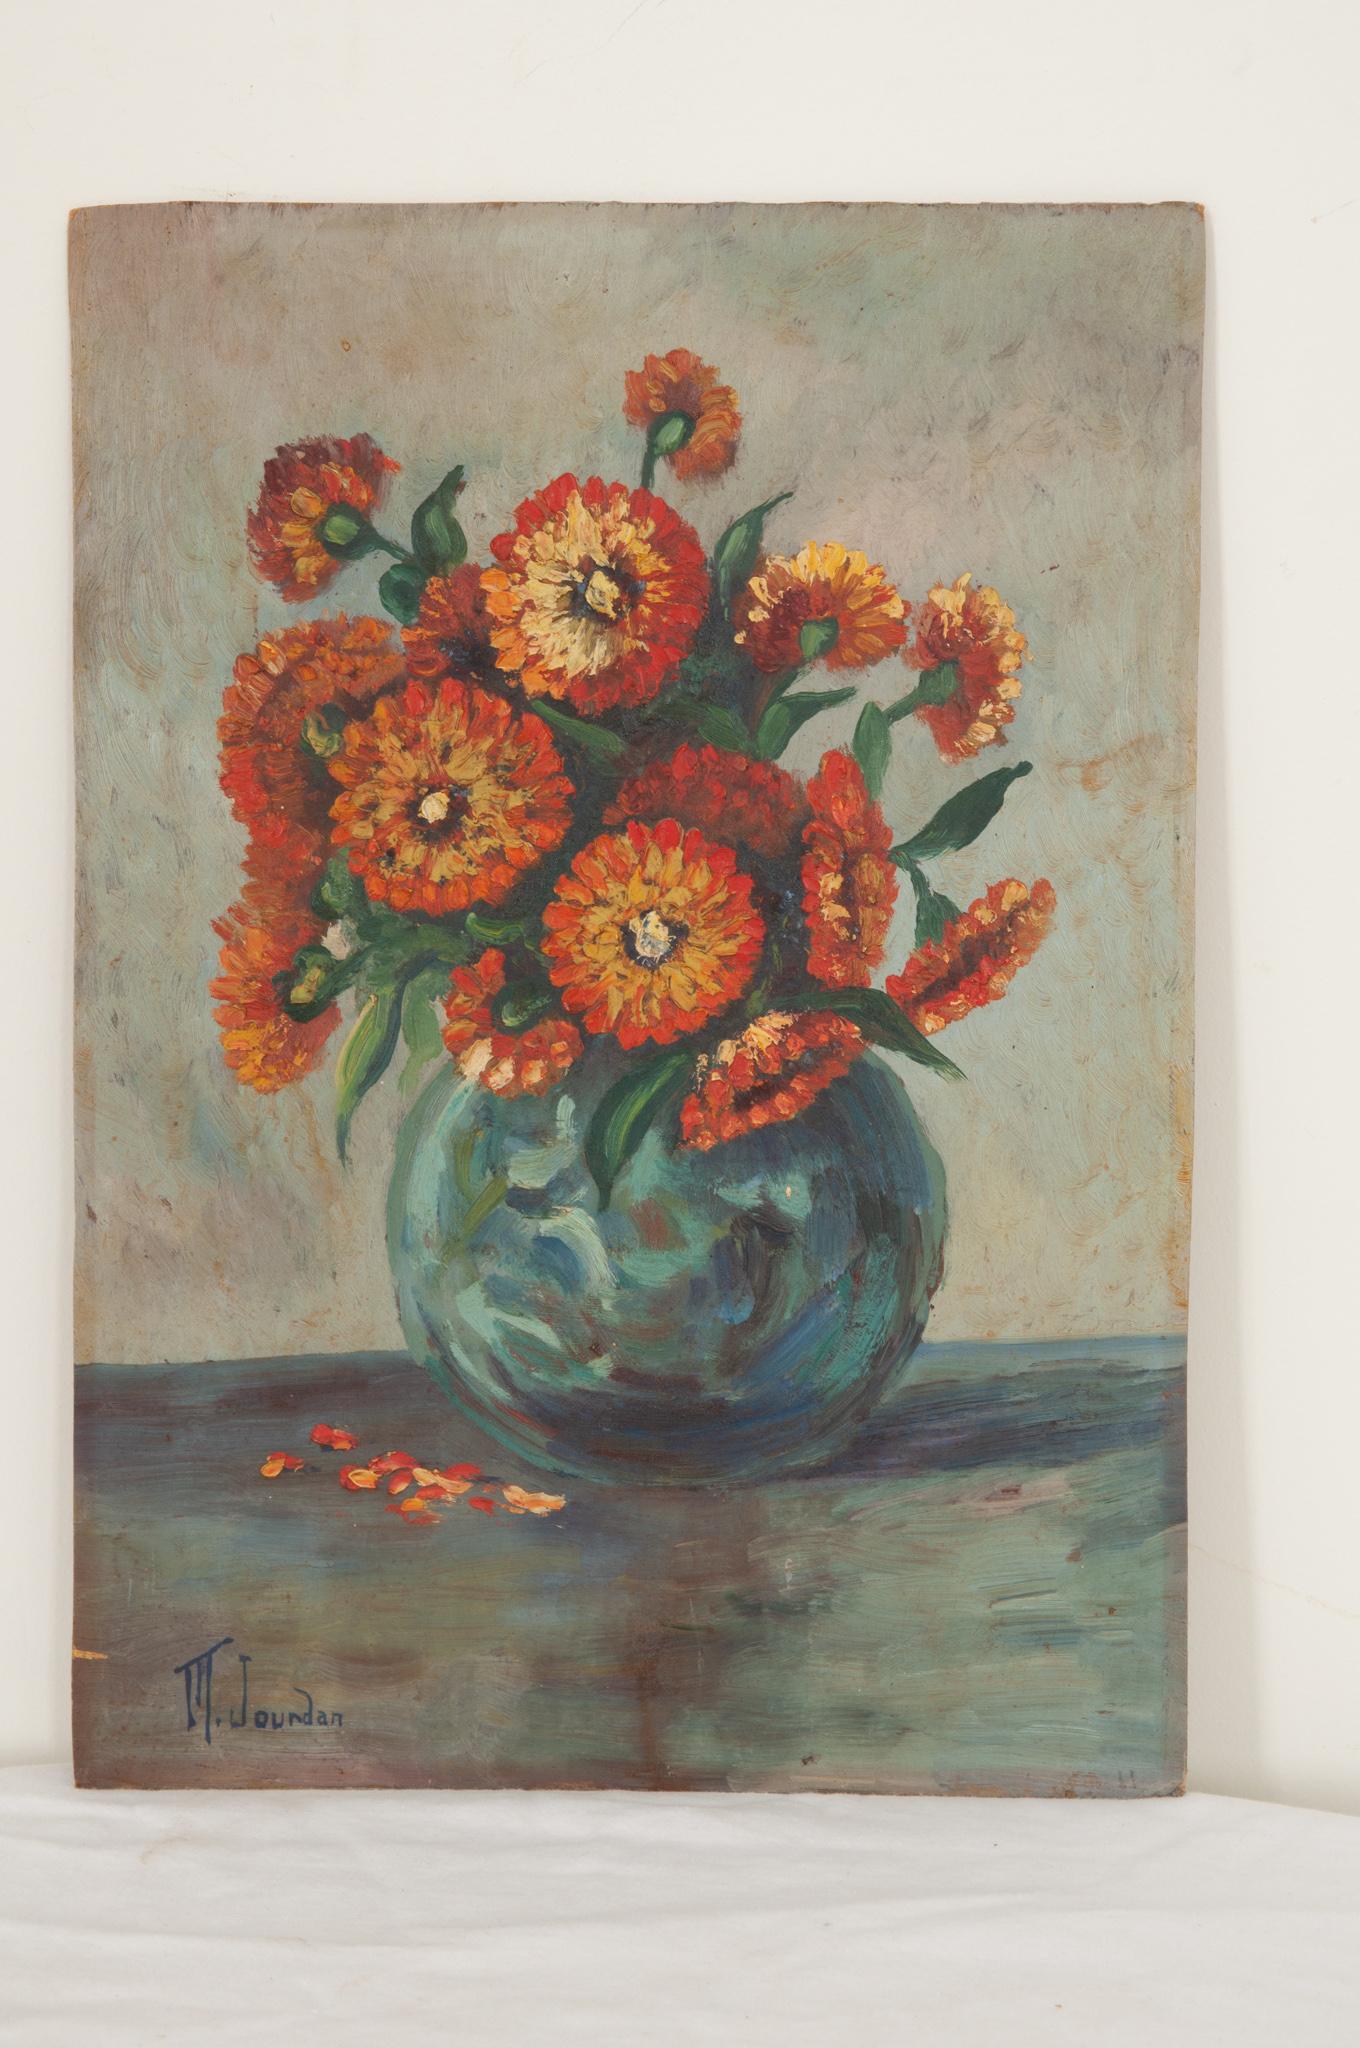 A lovely French still life painting of vibrant zinnias from France painted on board. Signed by the artist in the bottom left hand corner by M. Jourdan. Some wear around the edges gives it a great patina. Make sure to view the detailed images to get